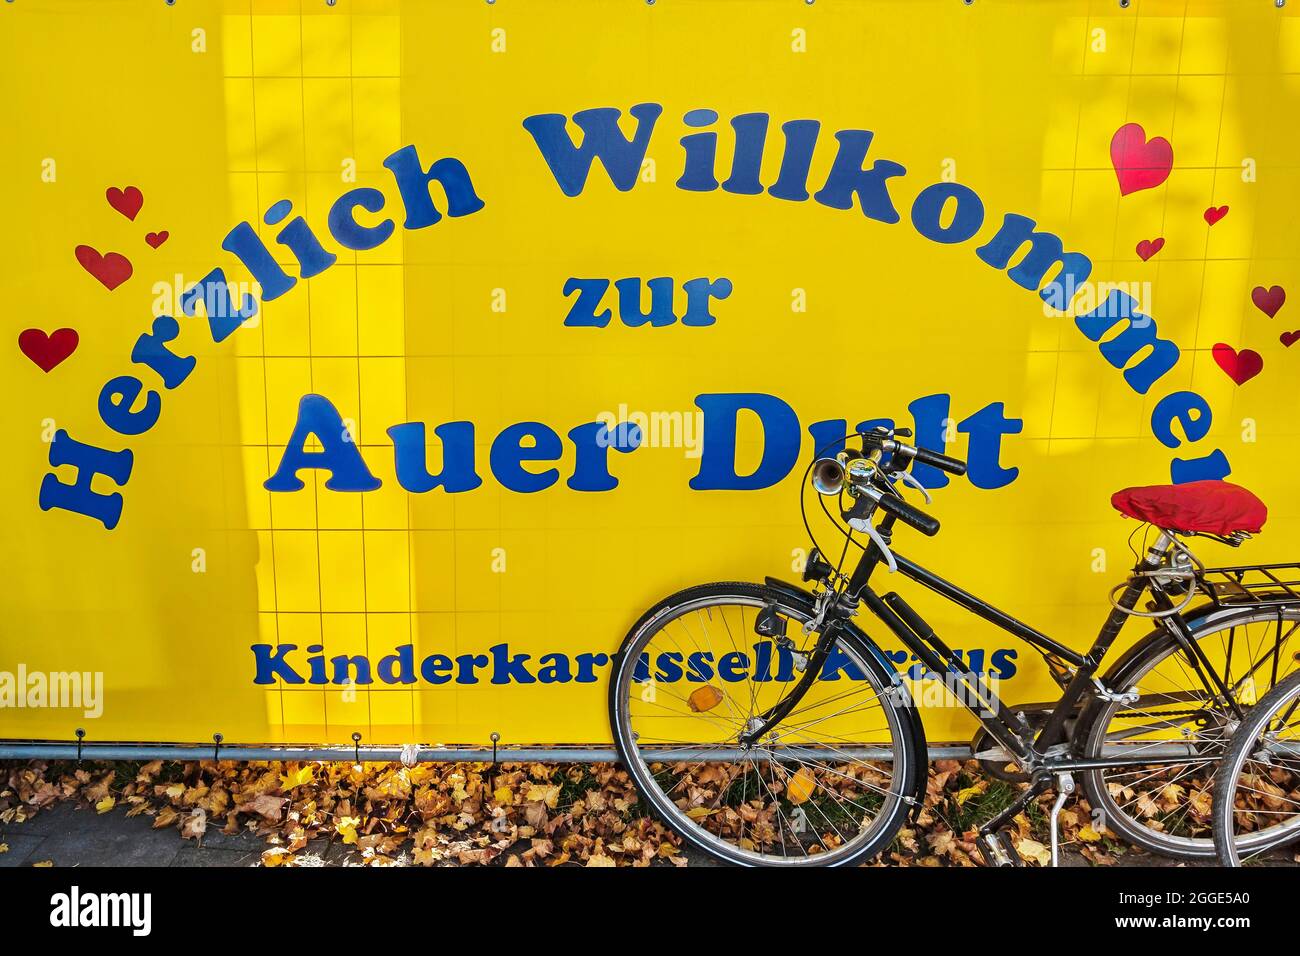 Advertising banner, Welcome to the Auer Dult, Munich, Bavaria, Germany Stock Photo